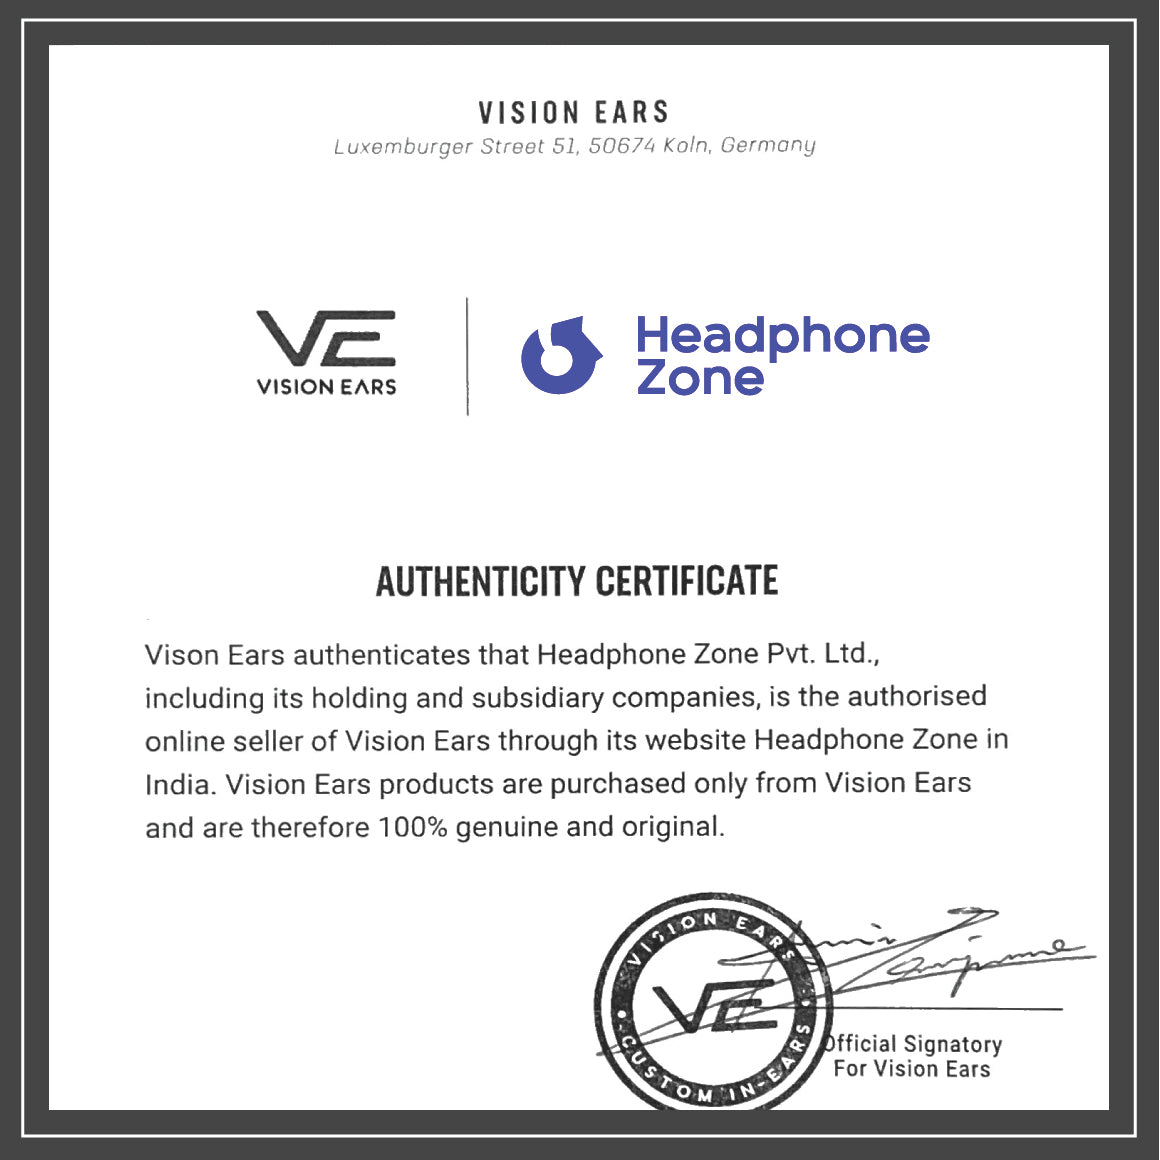 Headphone-Zone-Vision-Ears-Authenticity-Certificate